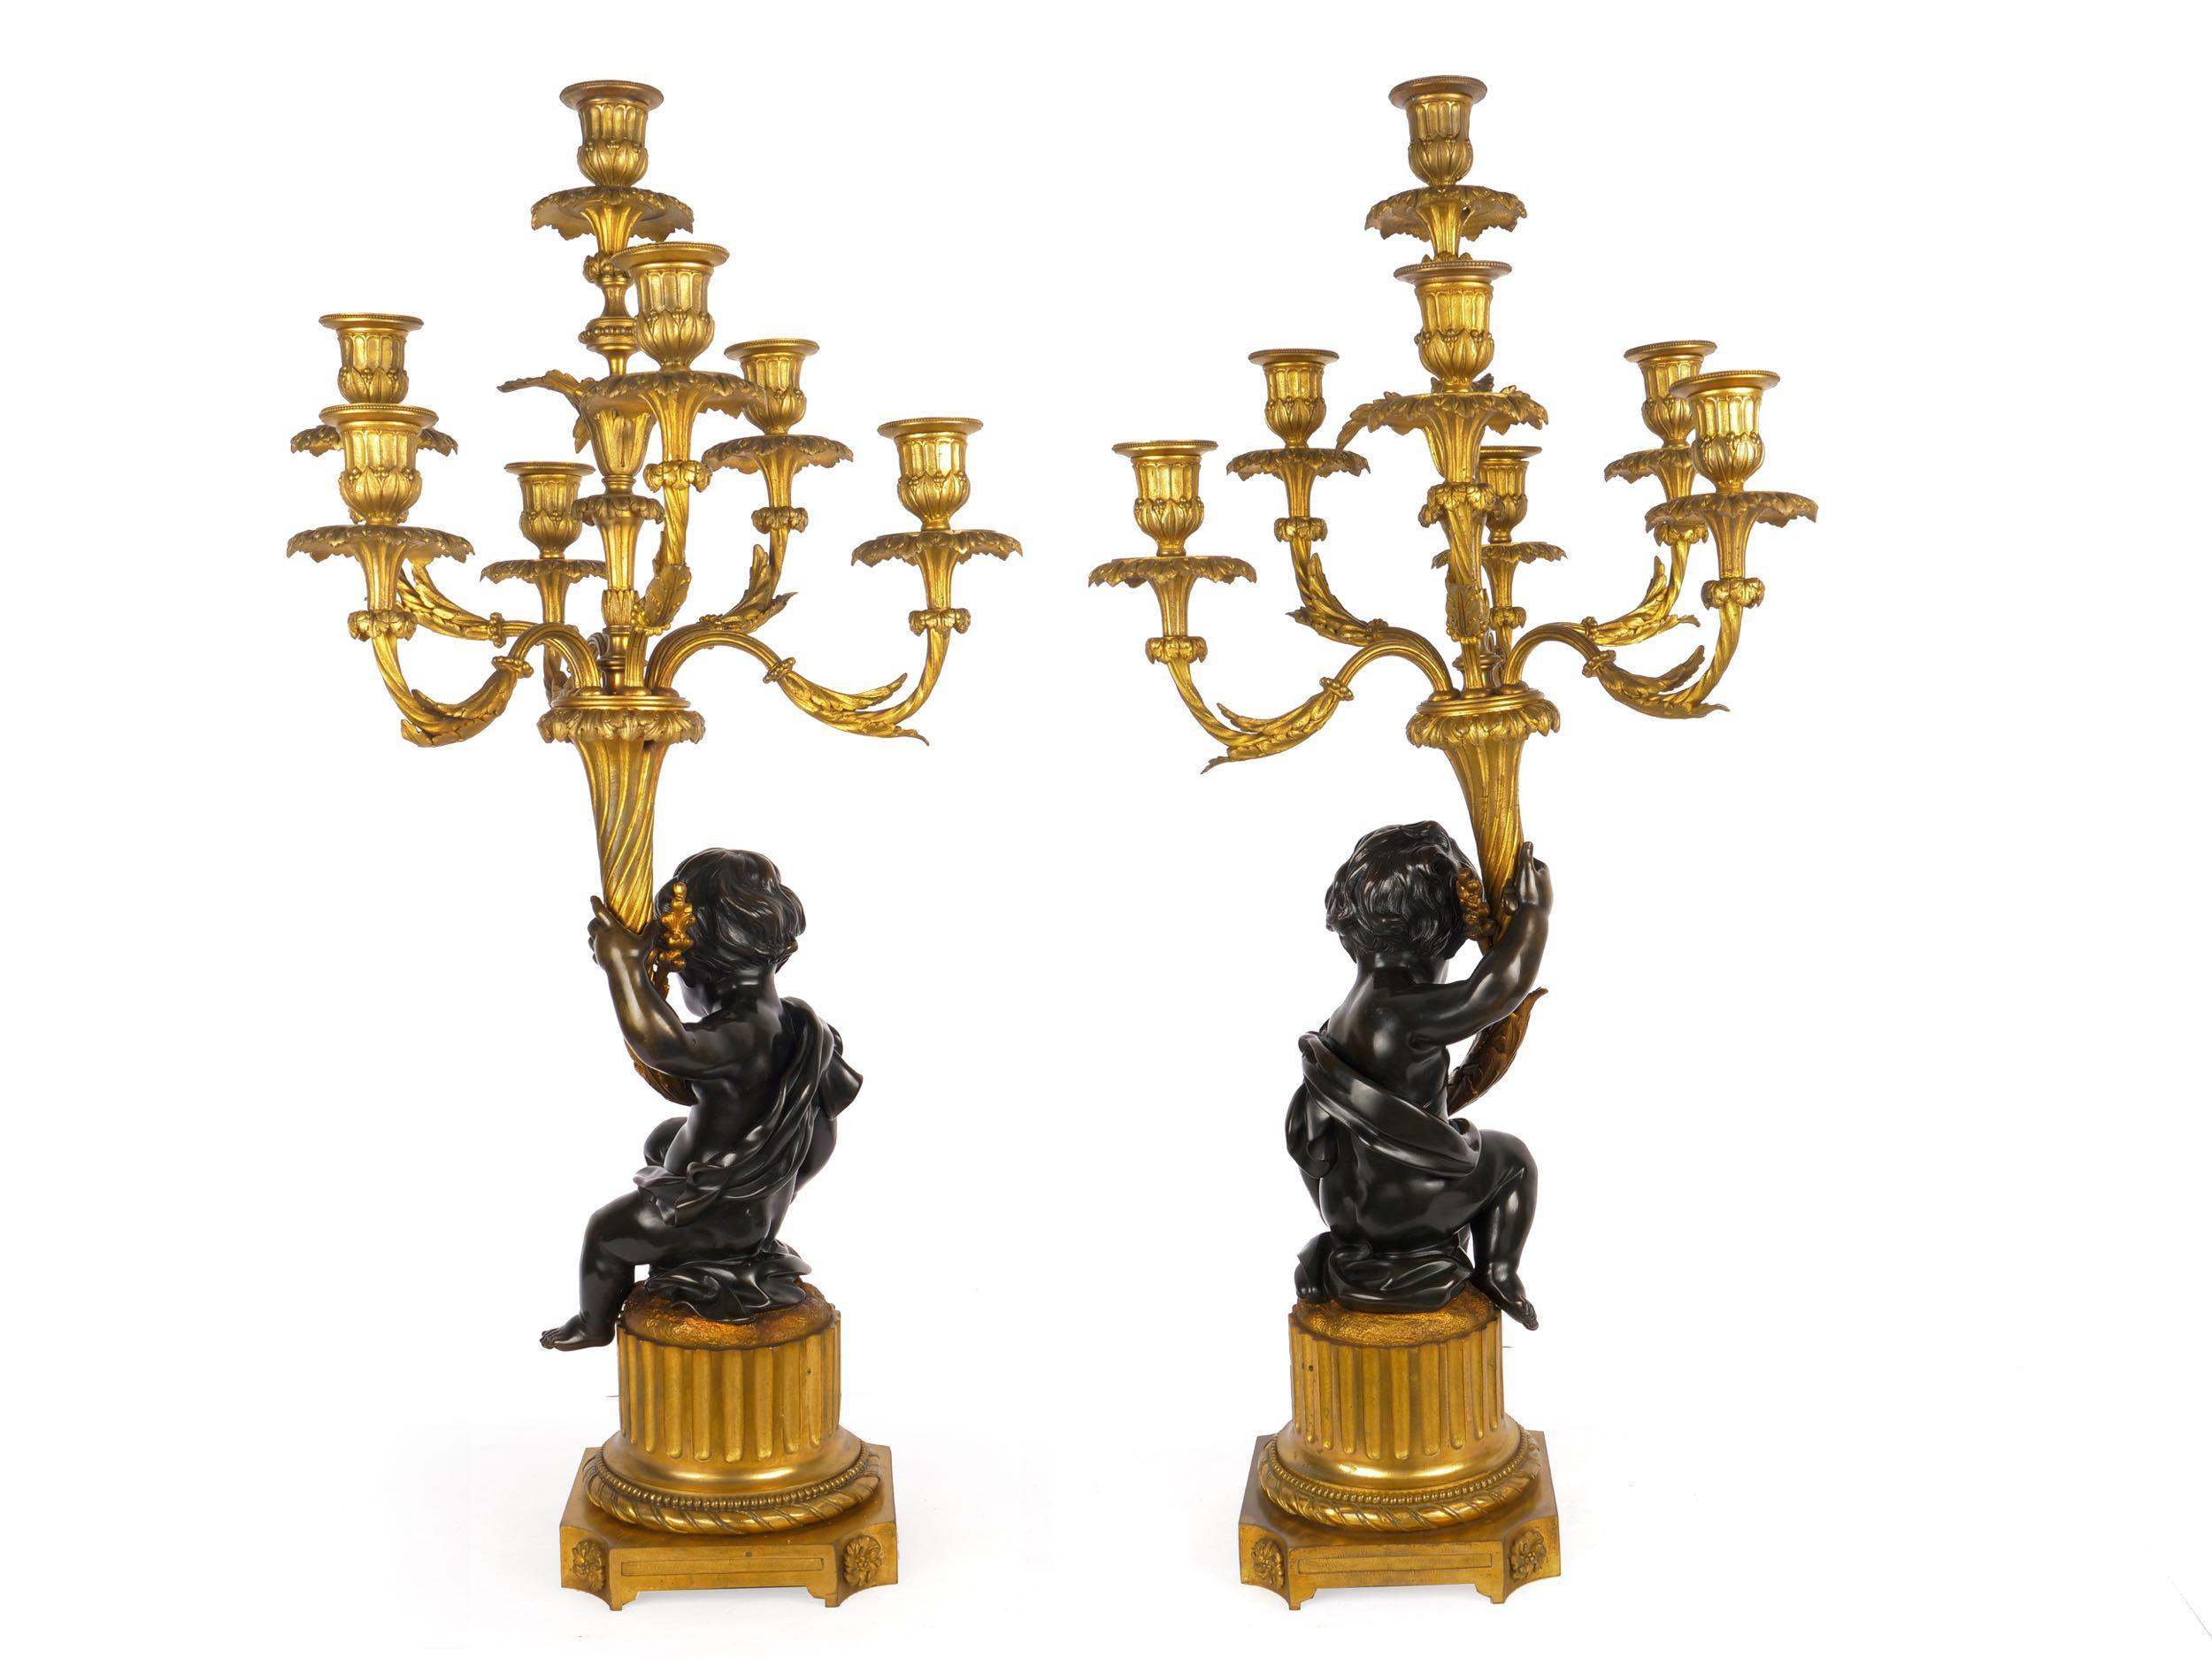 Gilt Pair of French Bronze Antique Putto Sculpture Candelabra Lamps, circa 1870-1890 For Sale